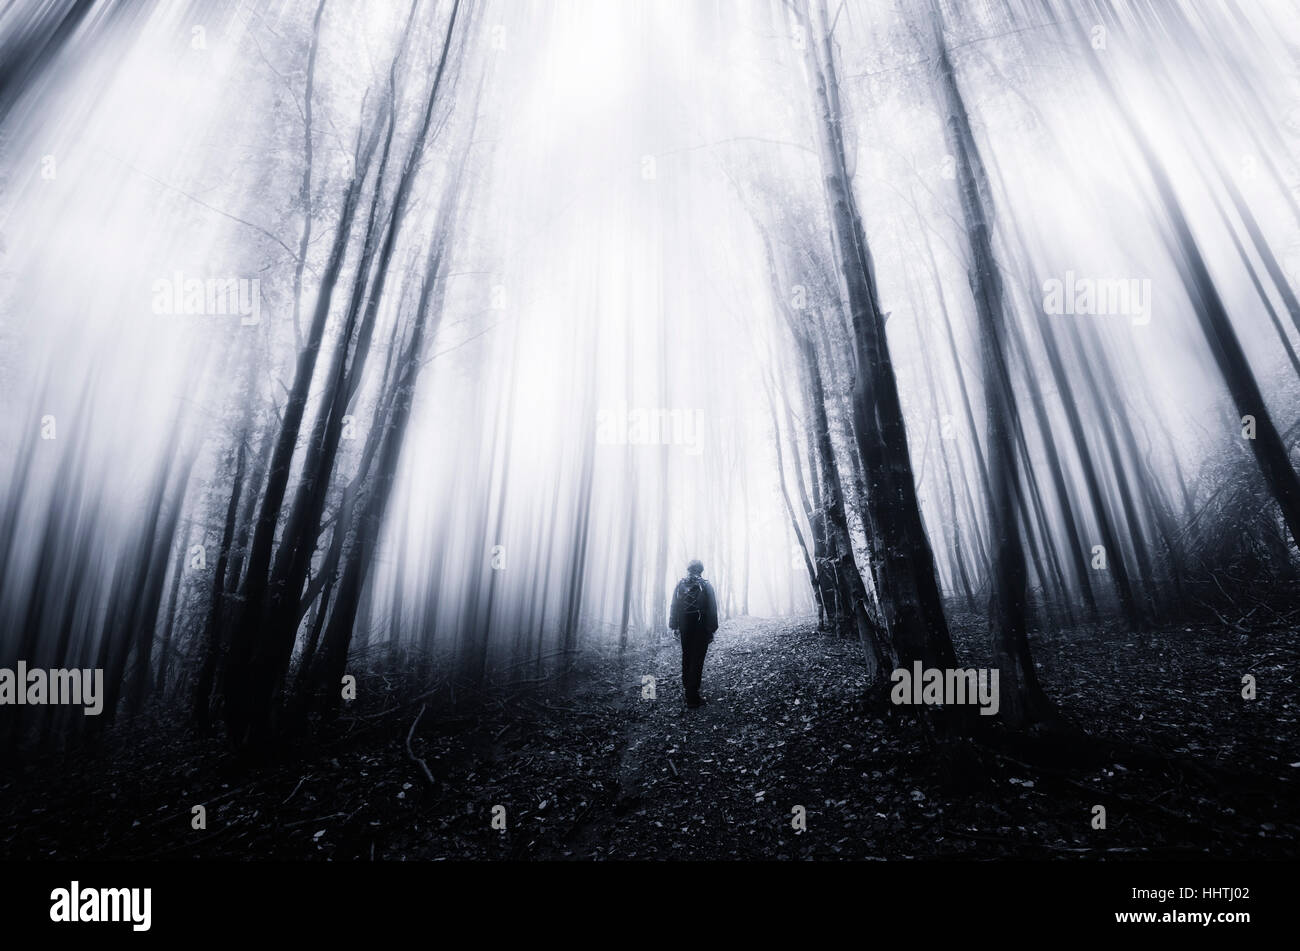 Man walking in surreal magical forest Stock Photo